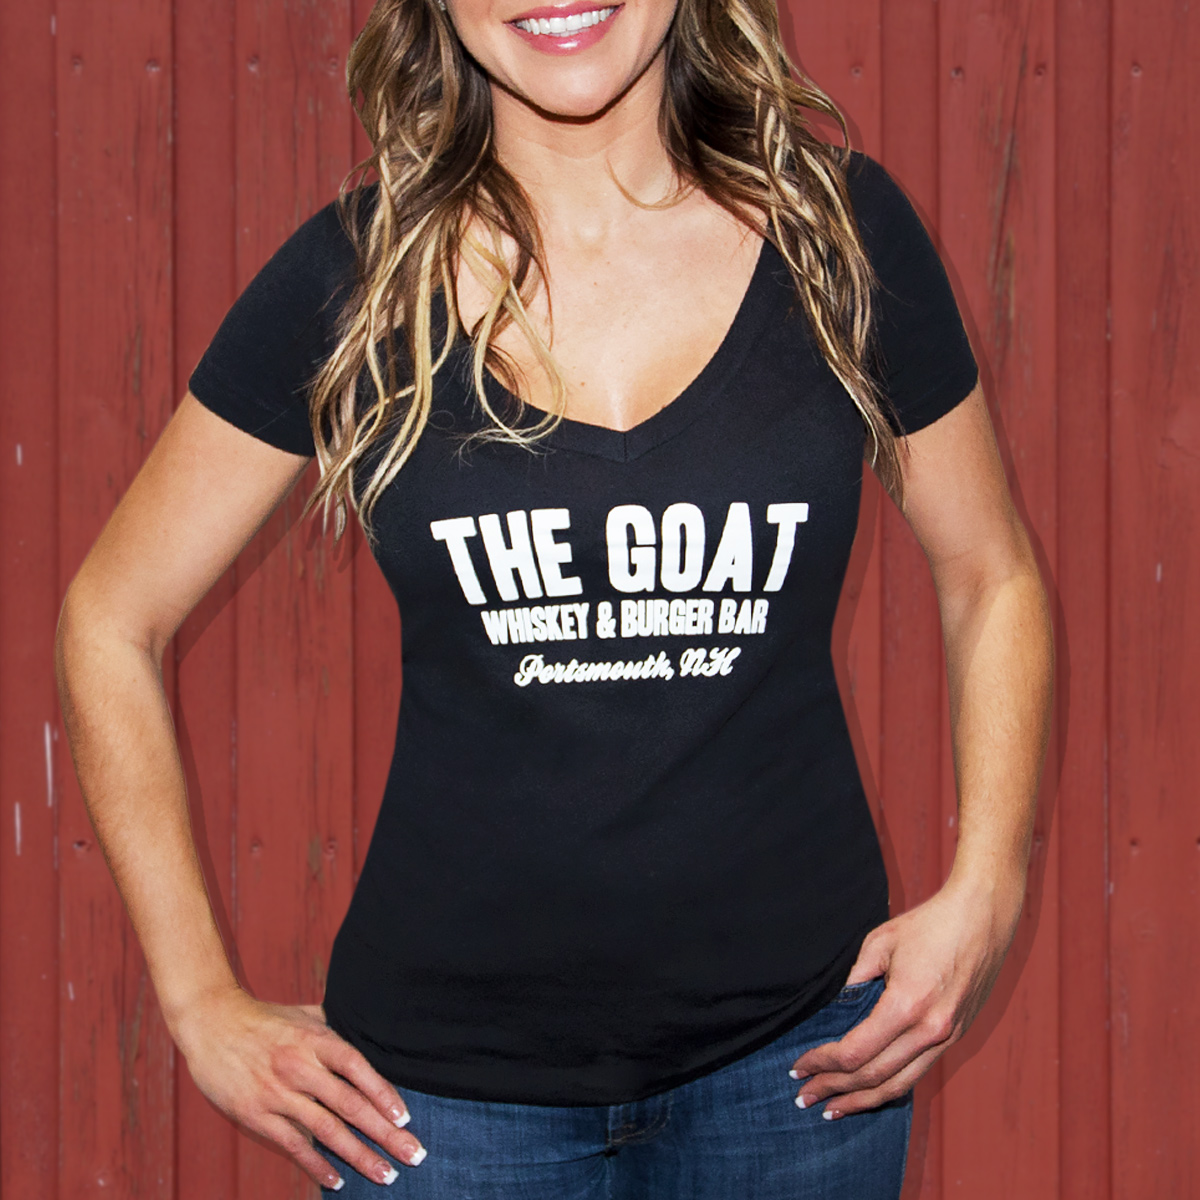 The Goat – Women’s V-neck Tee – The Goat Bar and Grill, Hampton NH ...